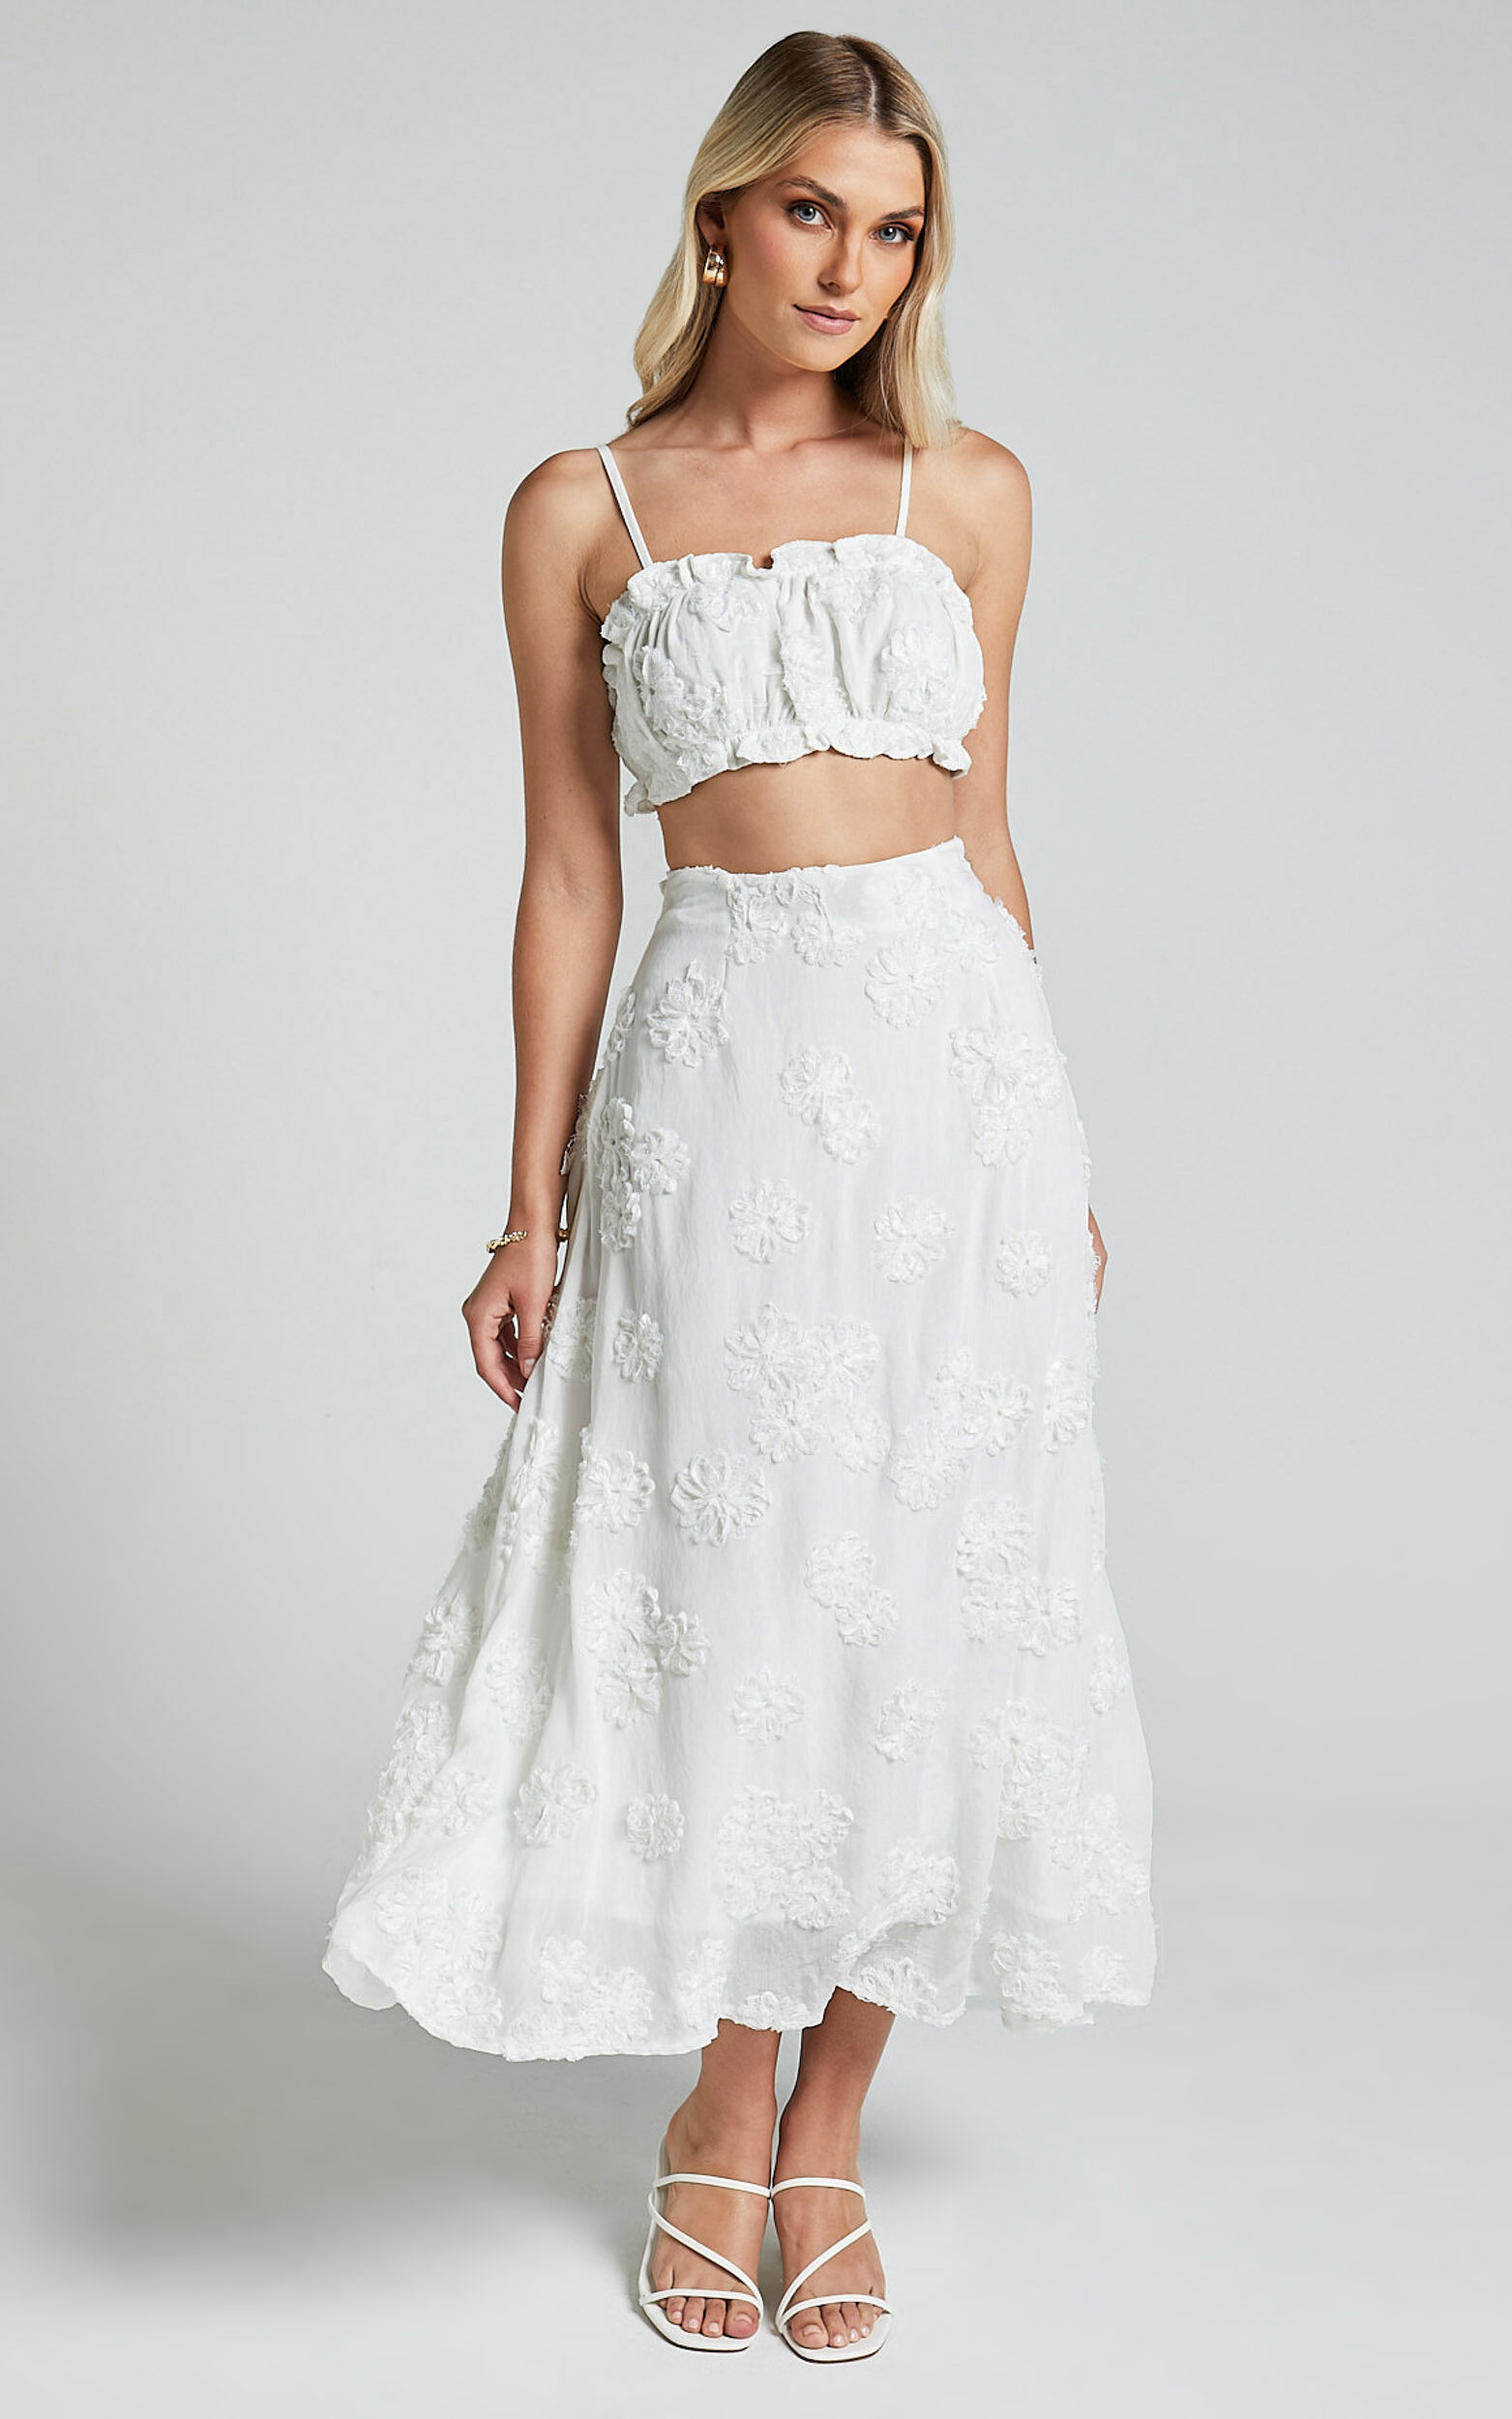 Candy Two Piece Set - Gathered Crop Top & 3D Floral Embroidery Midi Skirt in White - 06, WHT1